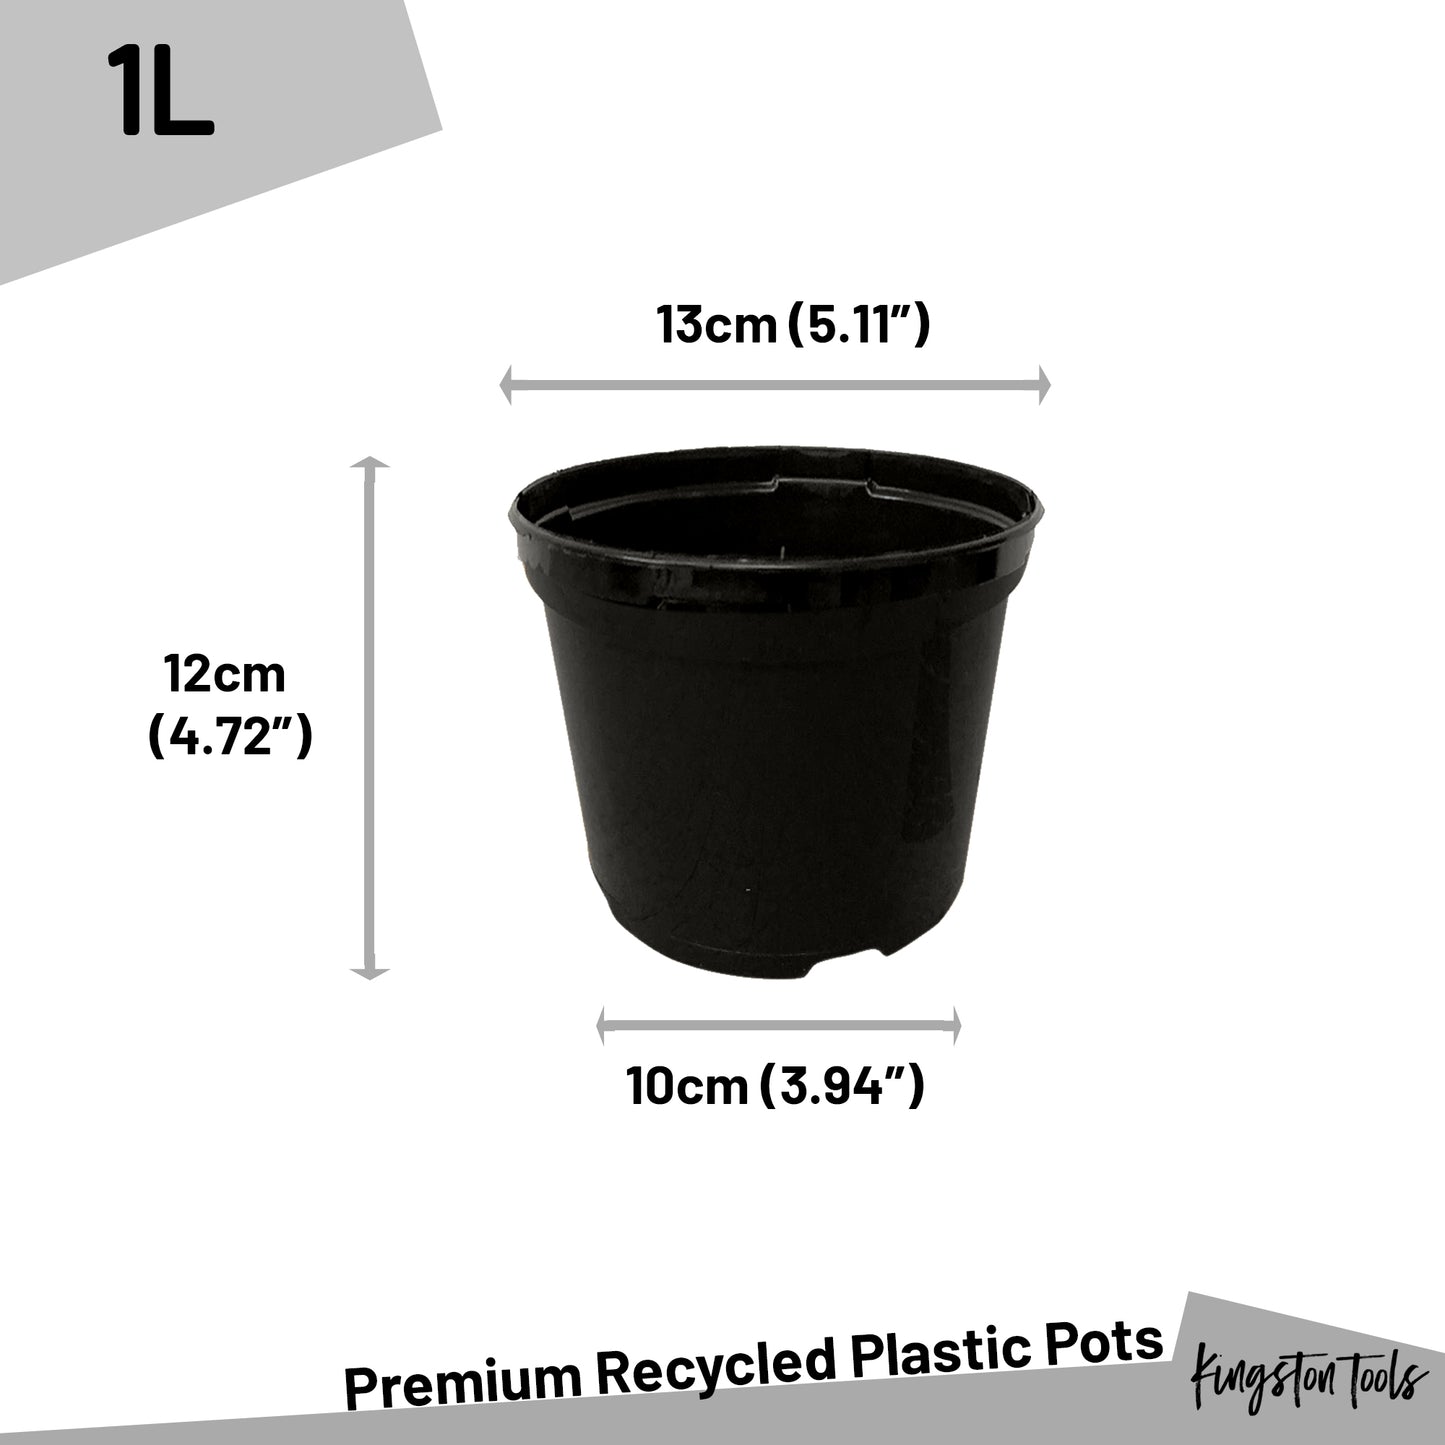 Premium Recycled Plastic Plant Pots High Quality Garden Planters - Black 7 Sizes Available